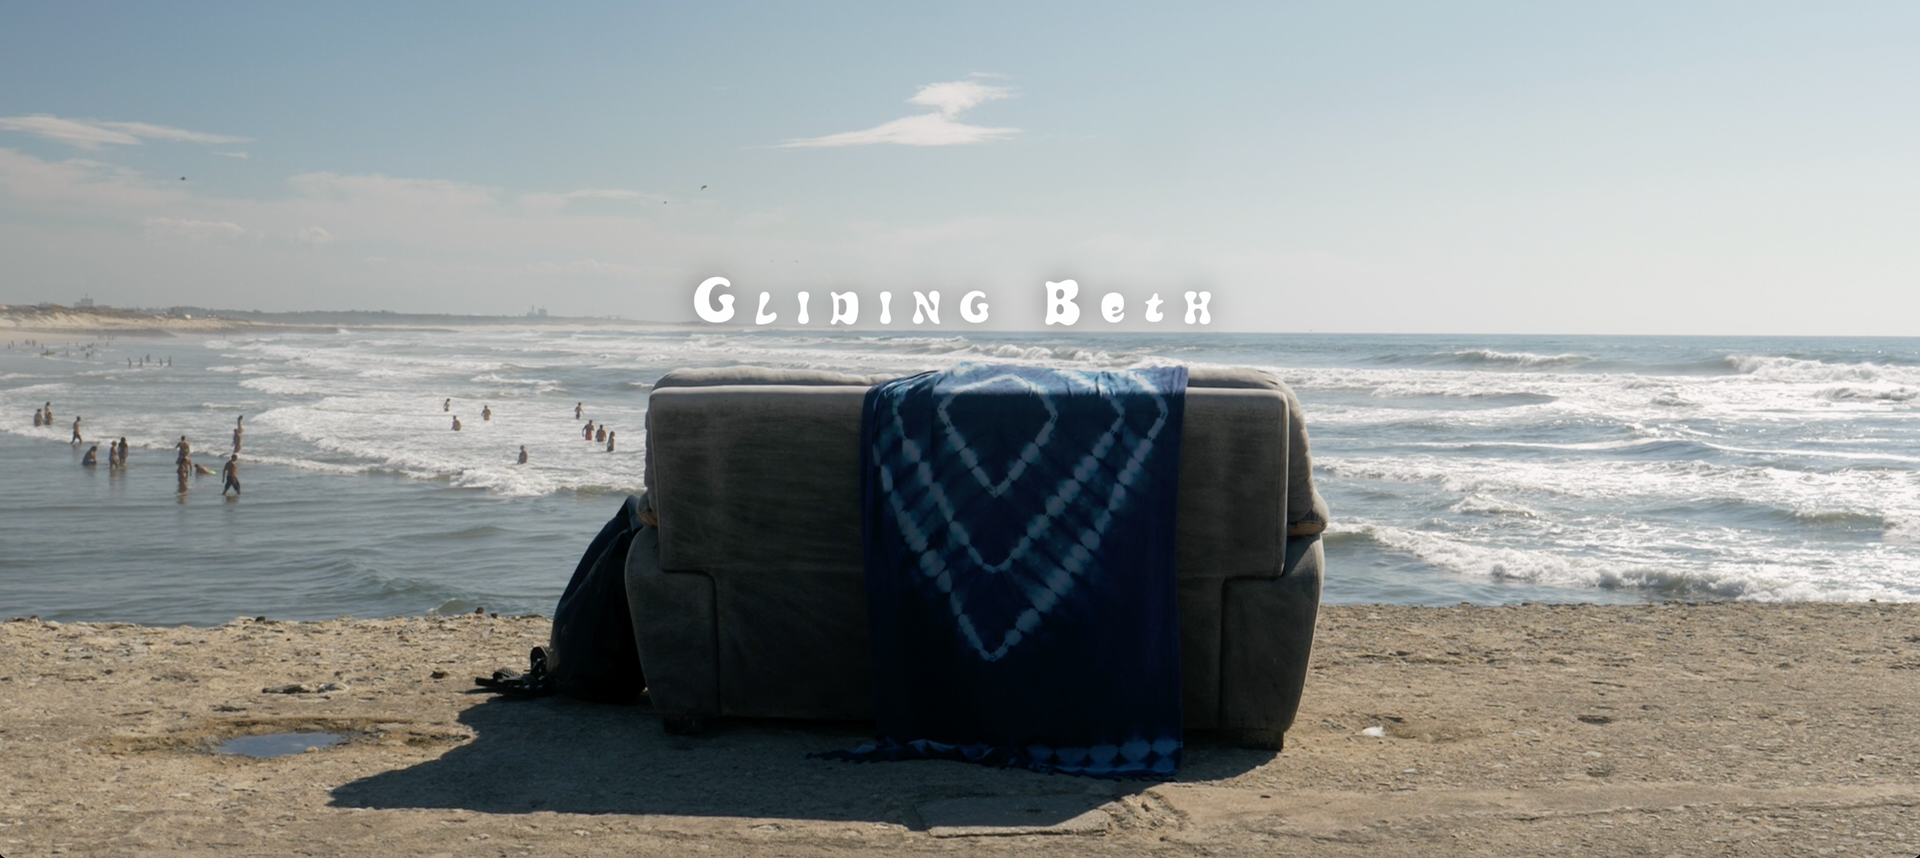 Video laden: Gliding Beth’ an ode to a week of searching for waves and simply just cruising along the coast of Portugal, to get to Gliding Barnicles festival.